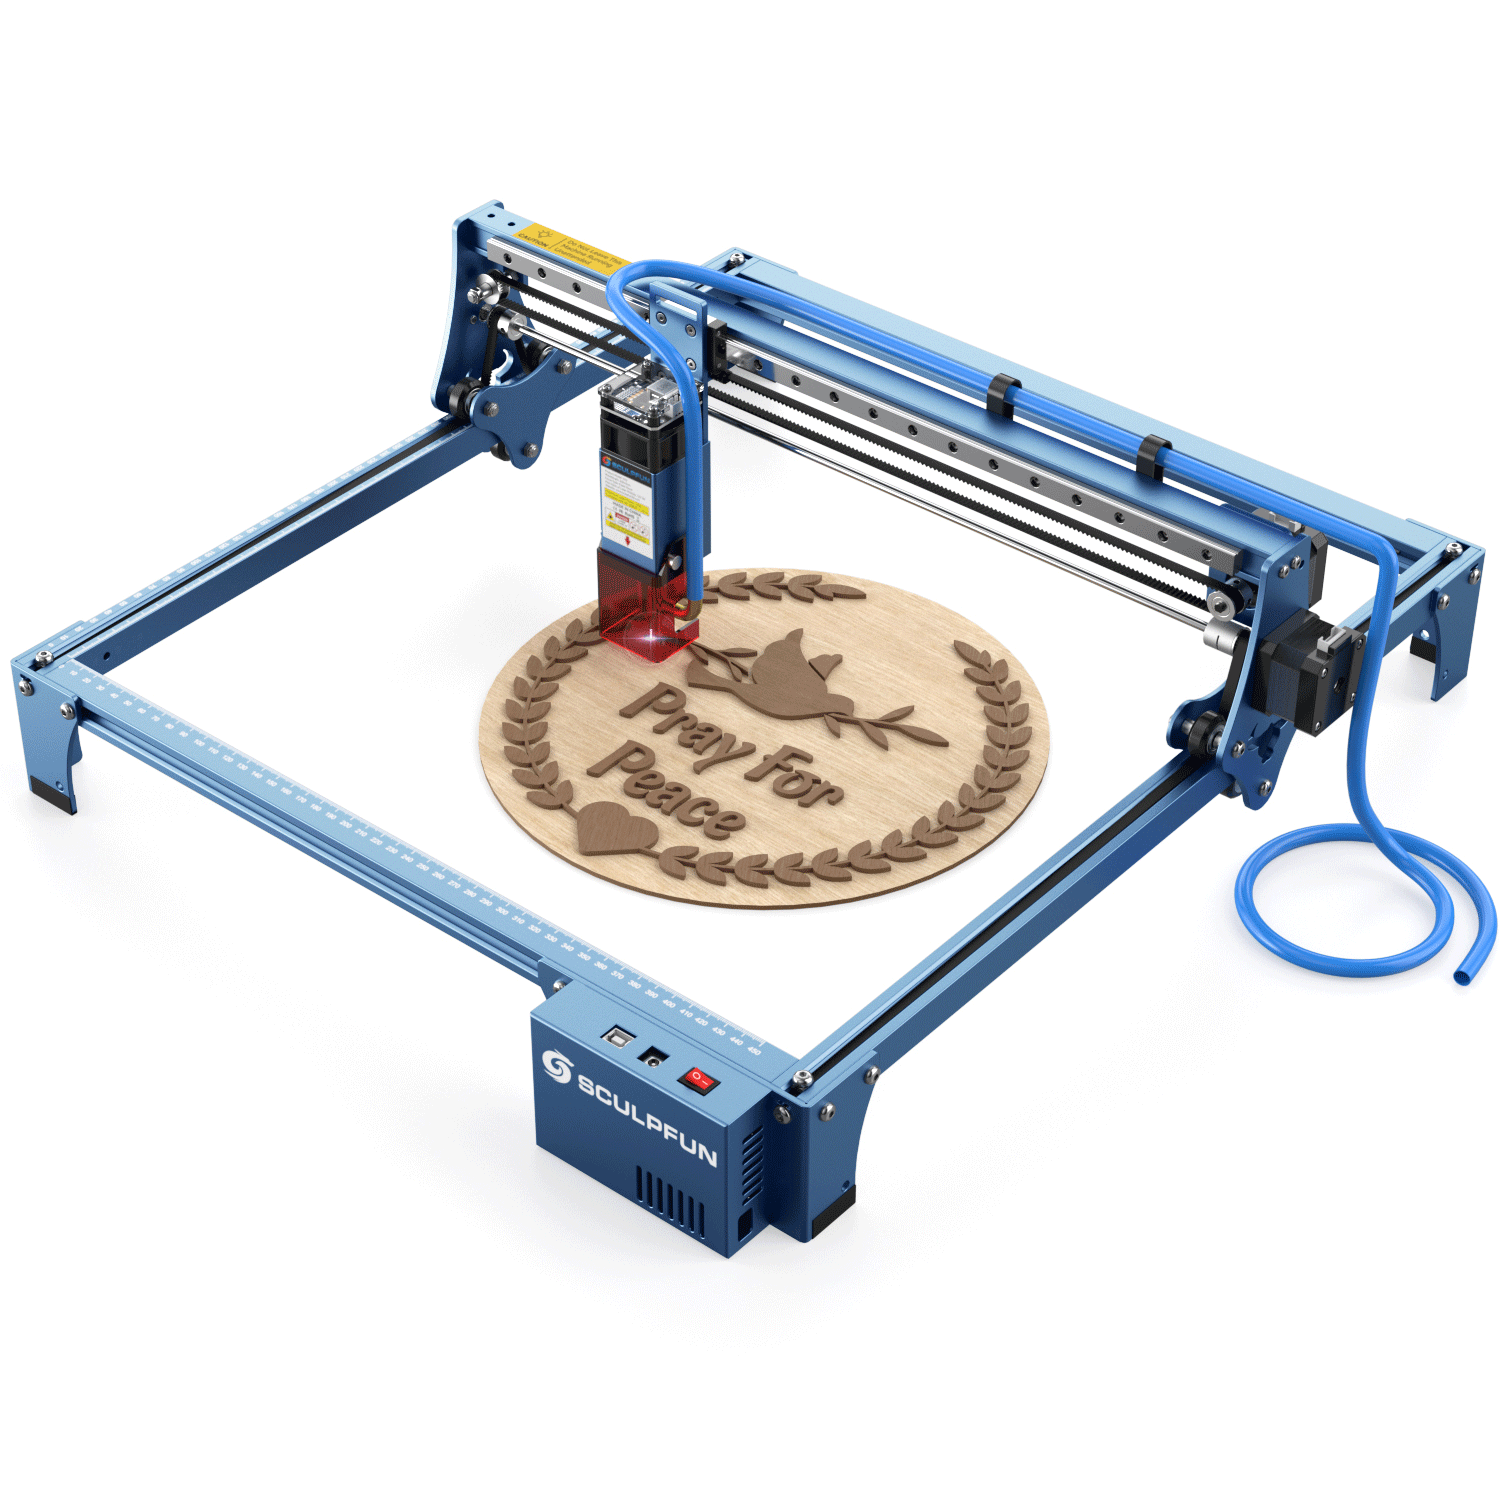 Sculpfun S10 Laser Engraver 10W Output Power High Accuracy Laser Cutter for  Metal Wood with Air Assist Nozzle 410x400mm Engraving Area